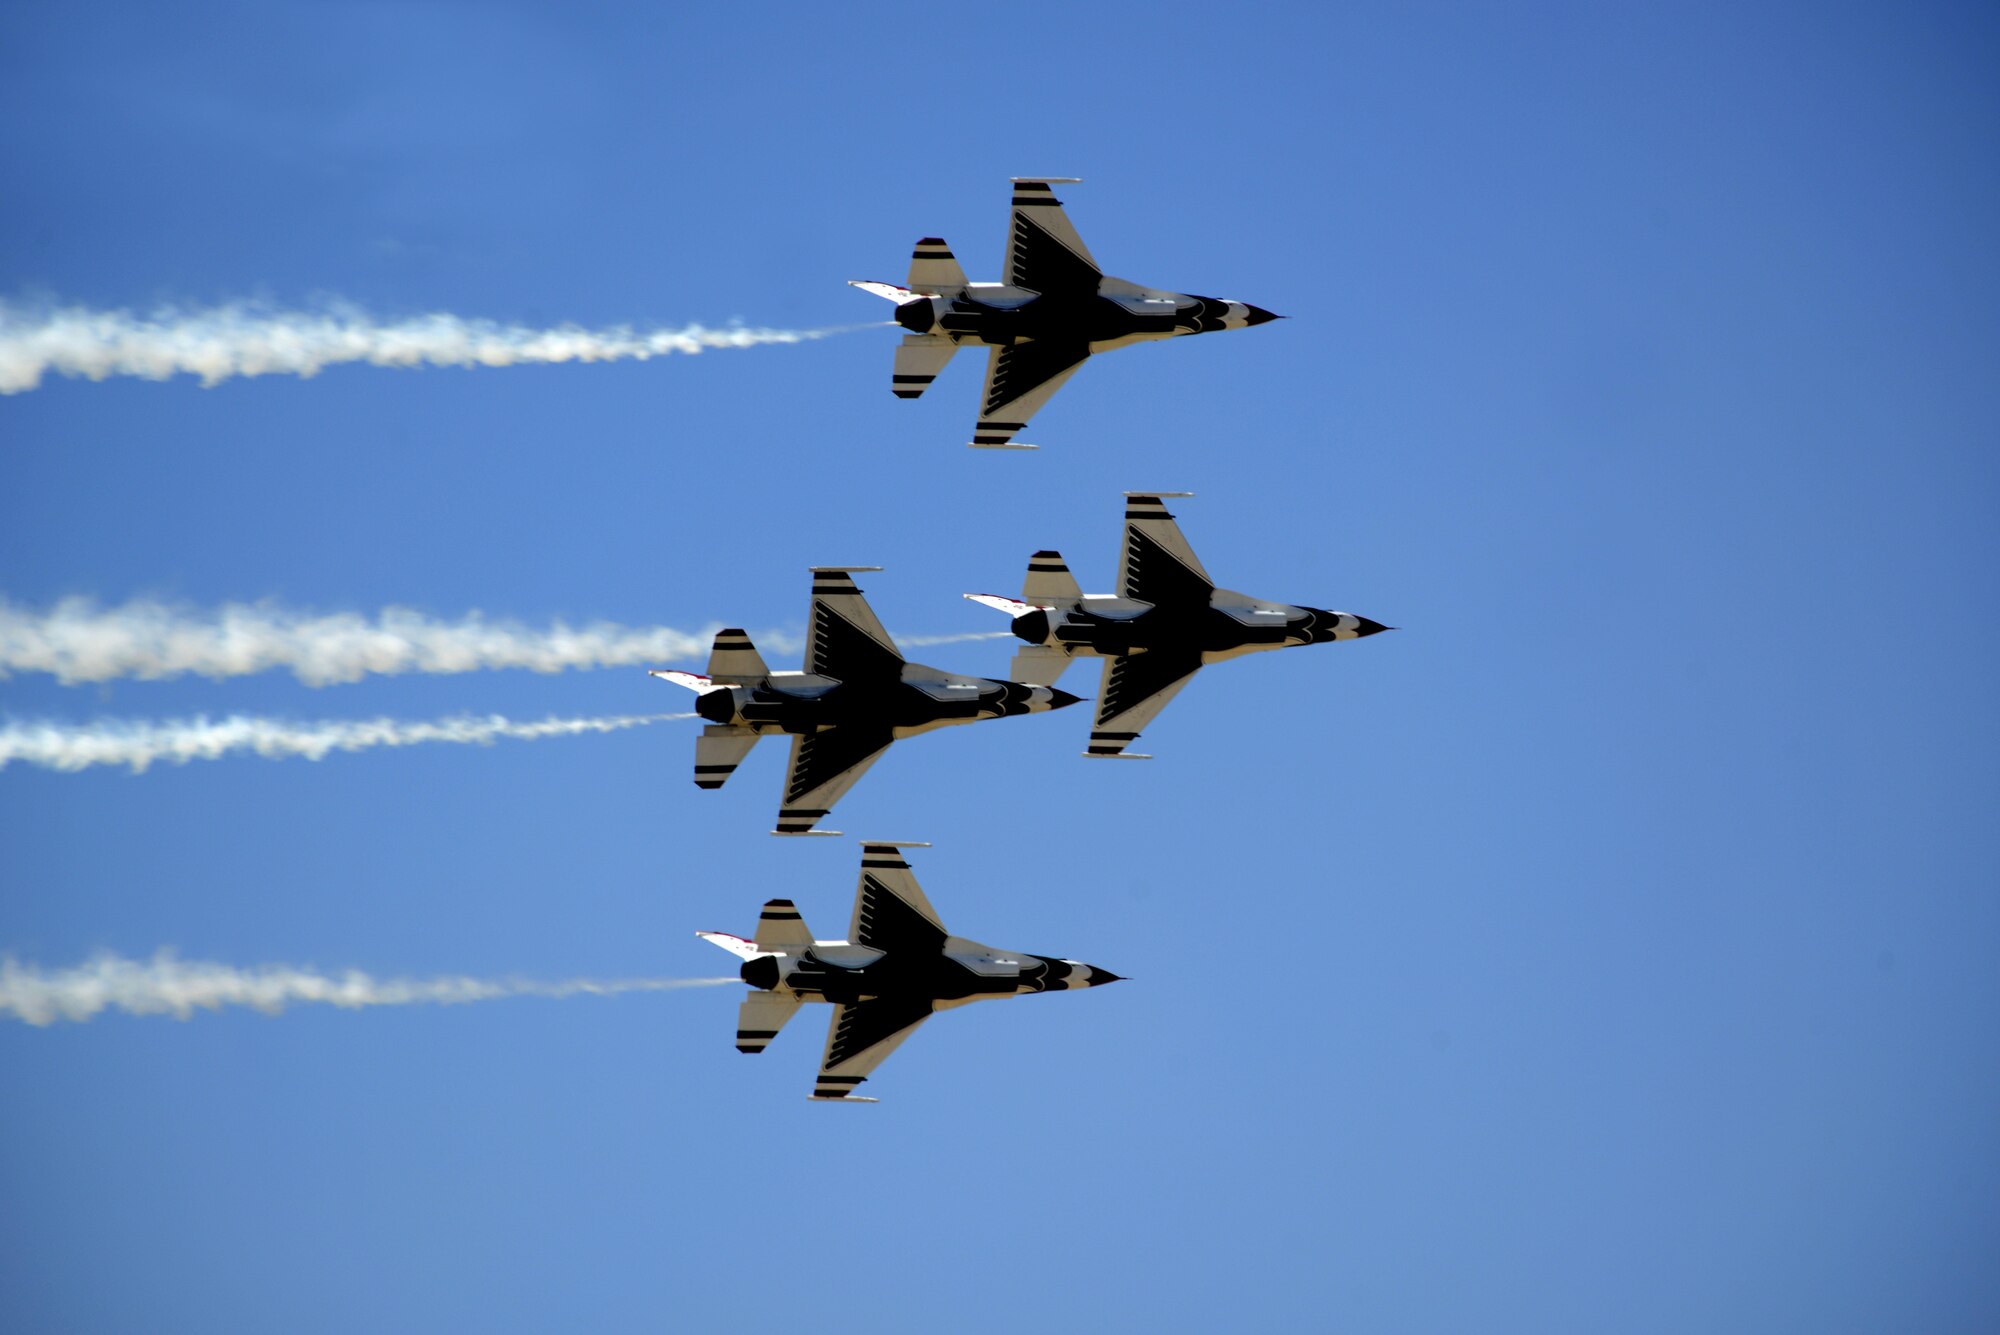 The U.S. Air Force Thunderbirds fly overhead at Luke Air Force  Base, 75 Years of Airpower.  The team performs precision aerial maneuvers to exhibit the capabilities of the modern high performance aircraft to audiences throughout the world.   (U.S. Air Force photo by Senior Airman Devante Williams)